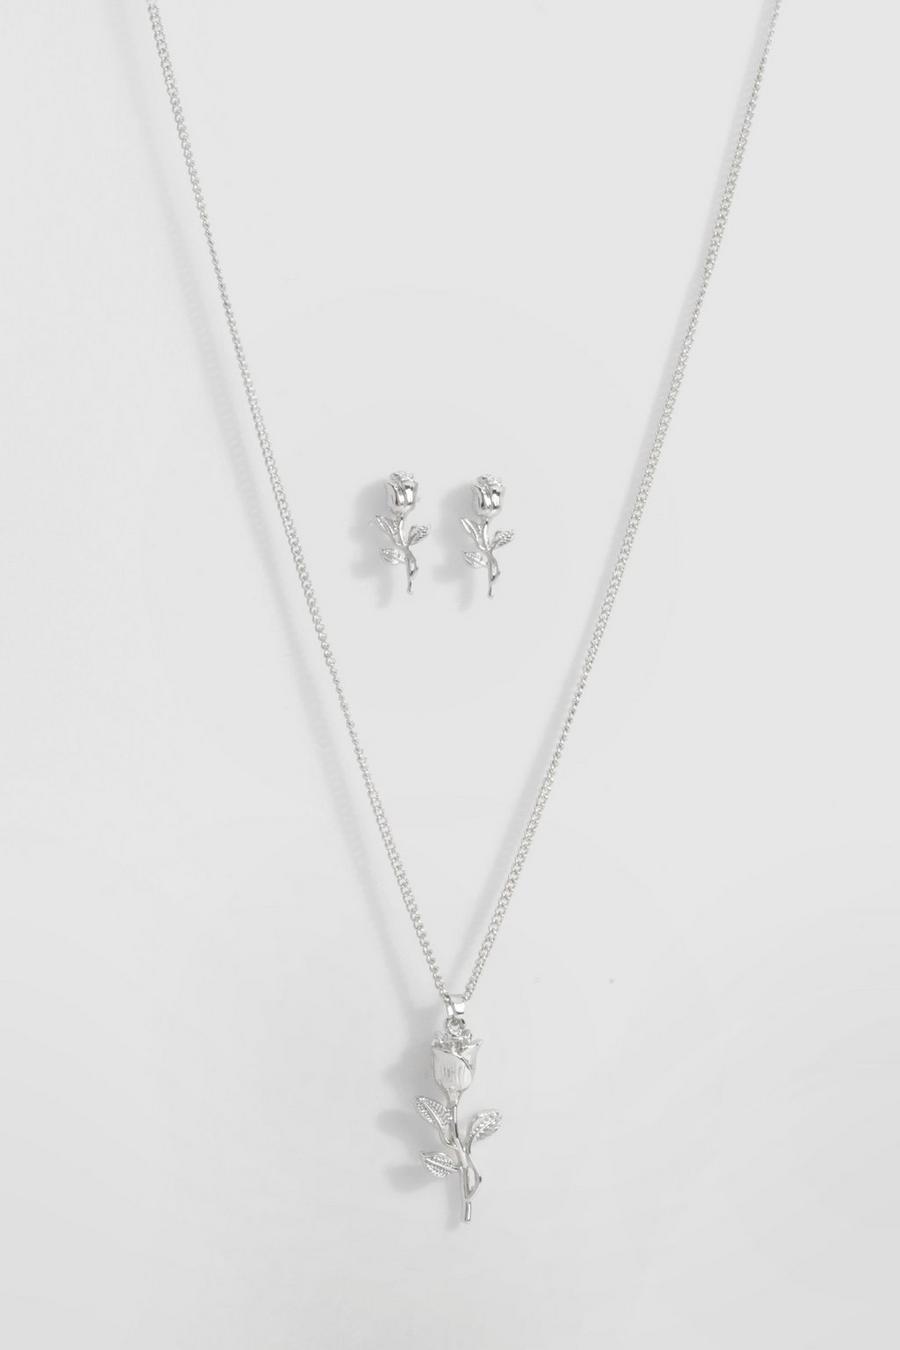 Silver Delicate Rose Detail Necklace & Earring Set